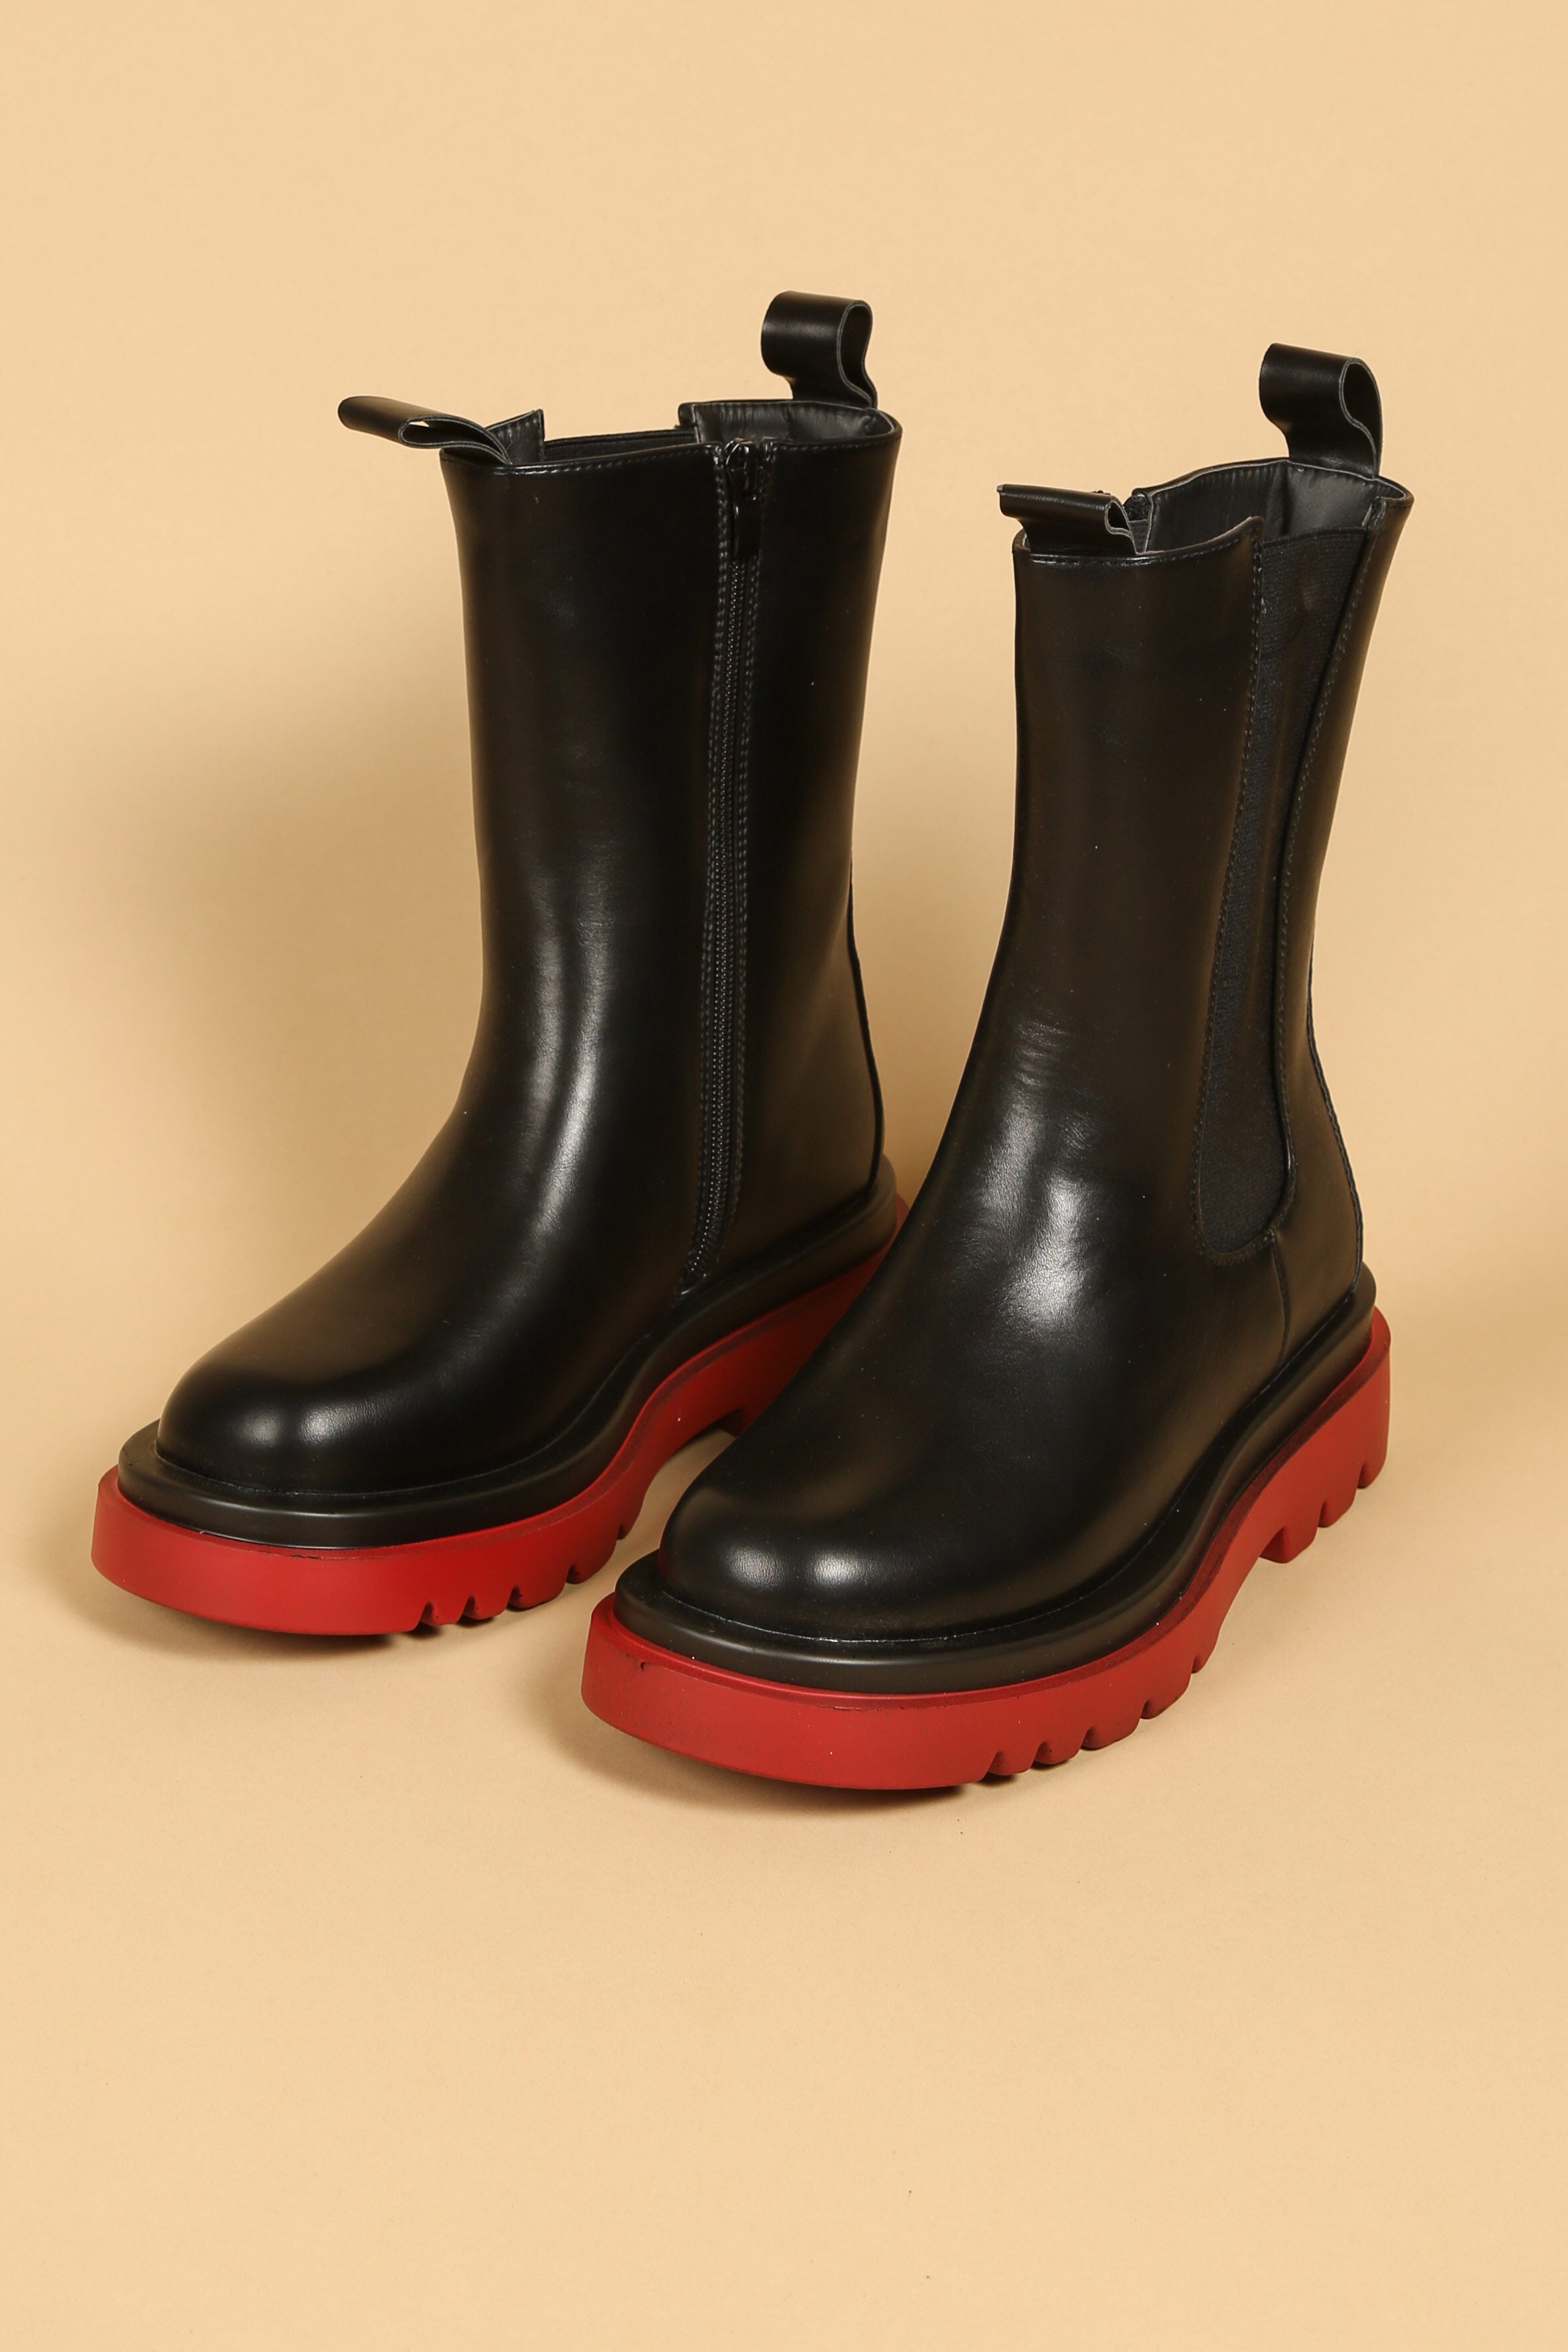 Finale Black Pu Red Chunky Sole Ankle Wrap Boots